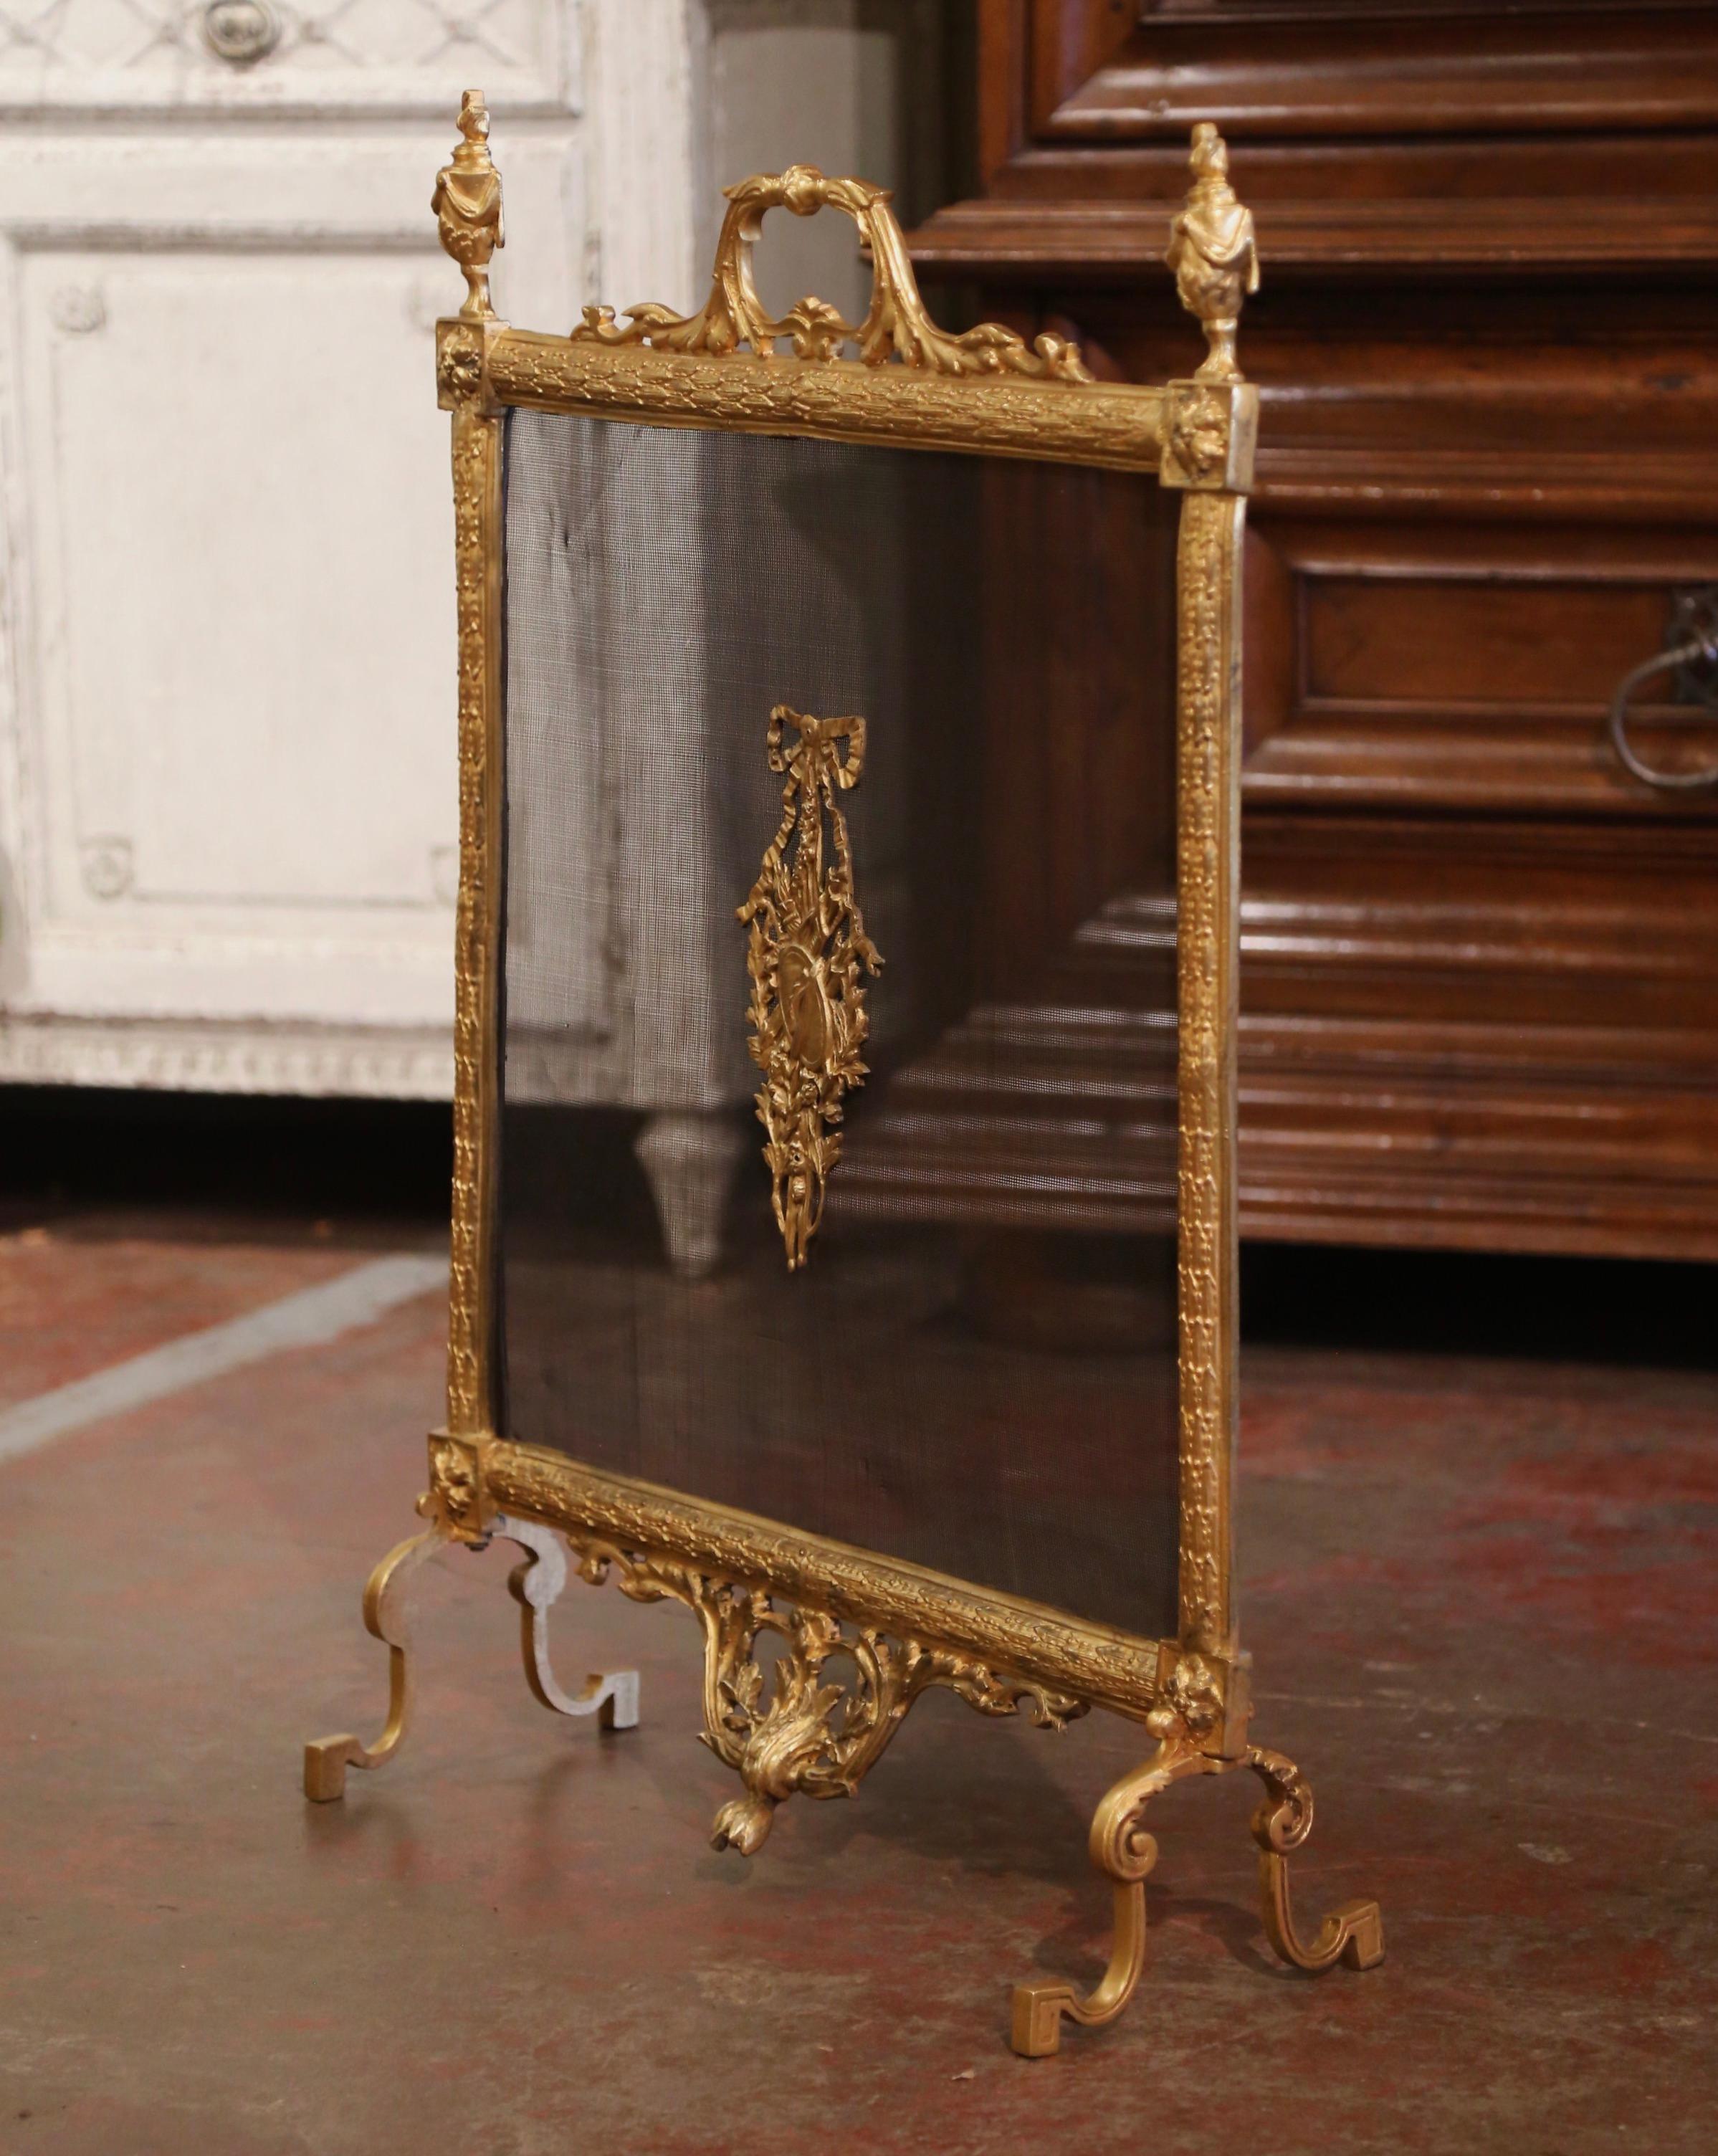 Decorate your fireplace with this elegant antique Parisian screen. Crafted in France circa 1870, the rectangular shaped screen sits on scroll feet decorated with acanthus leaf motifs over a carved and pierced floral apron. With mesh wire on the